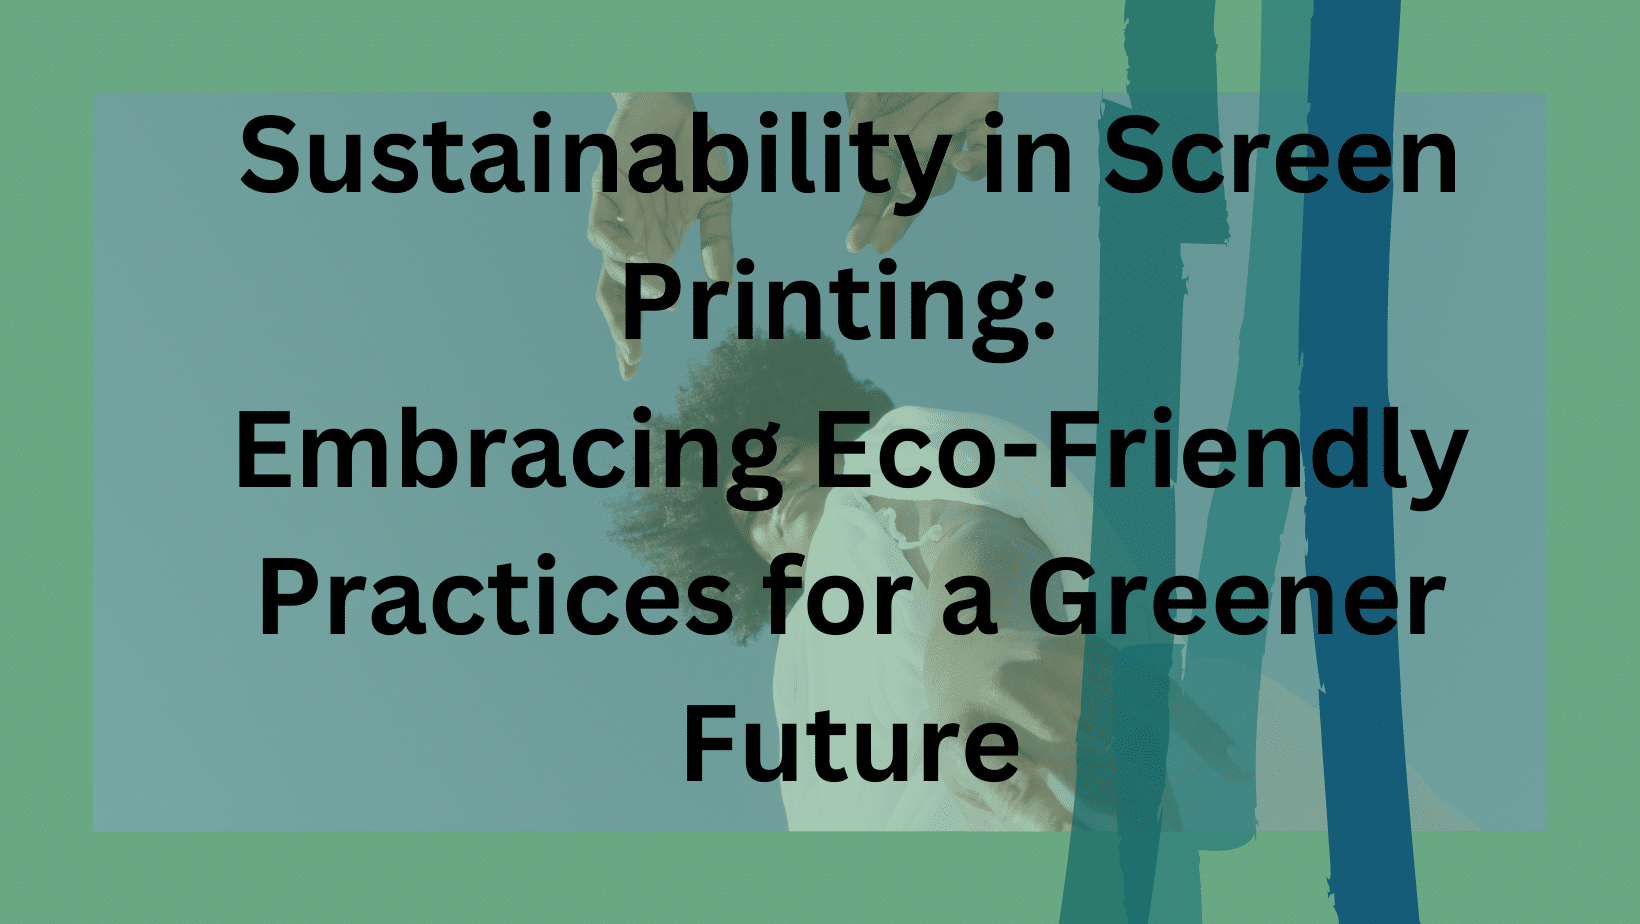 Sustainability in Screen Printing: Embracing Eco-Friendly Practices for a Greener Future